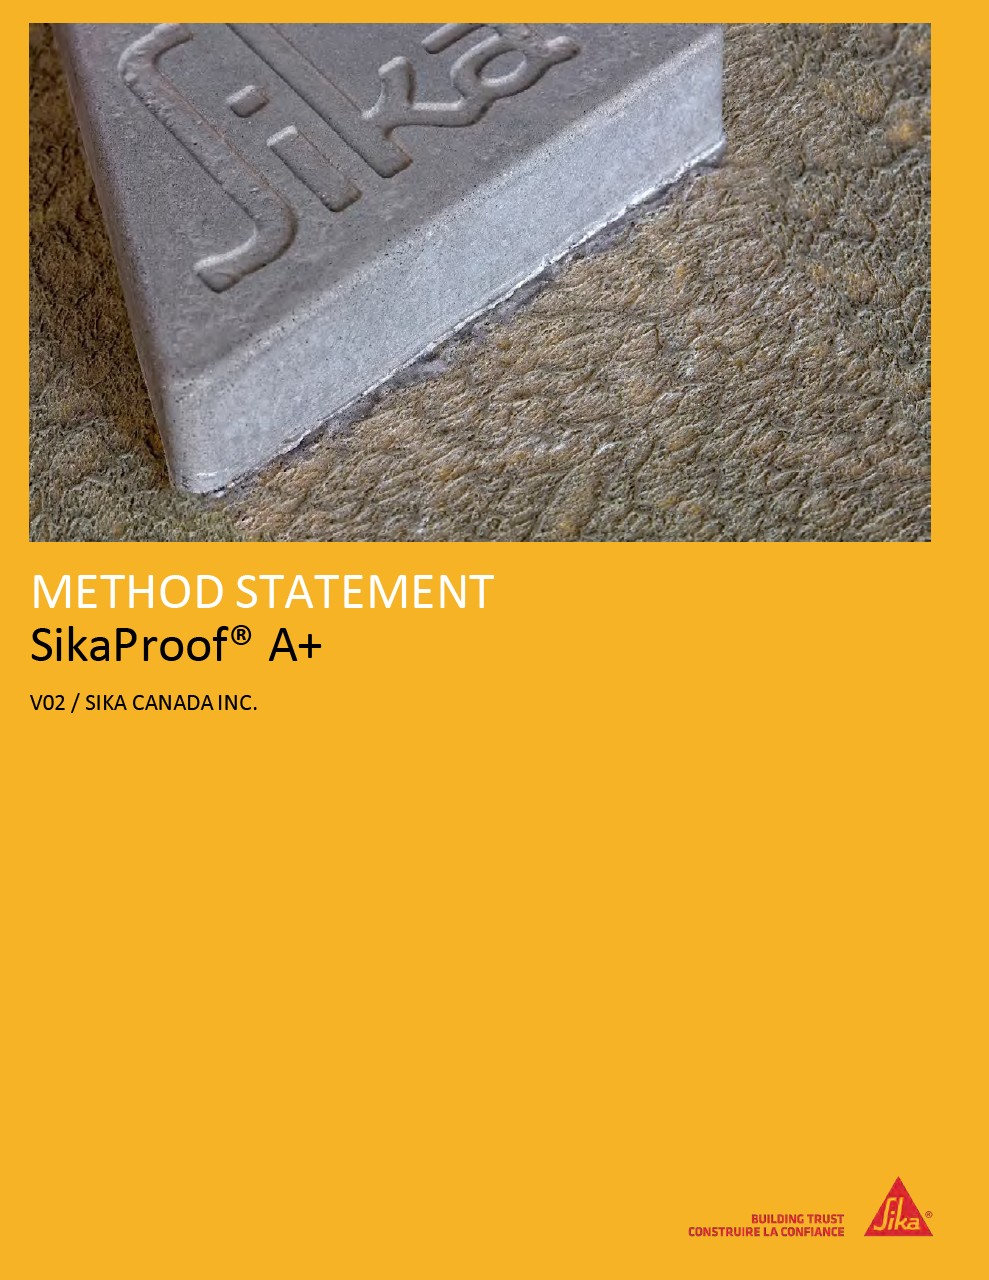 SikaProof A+ Method Statement